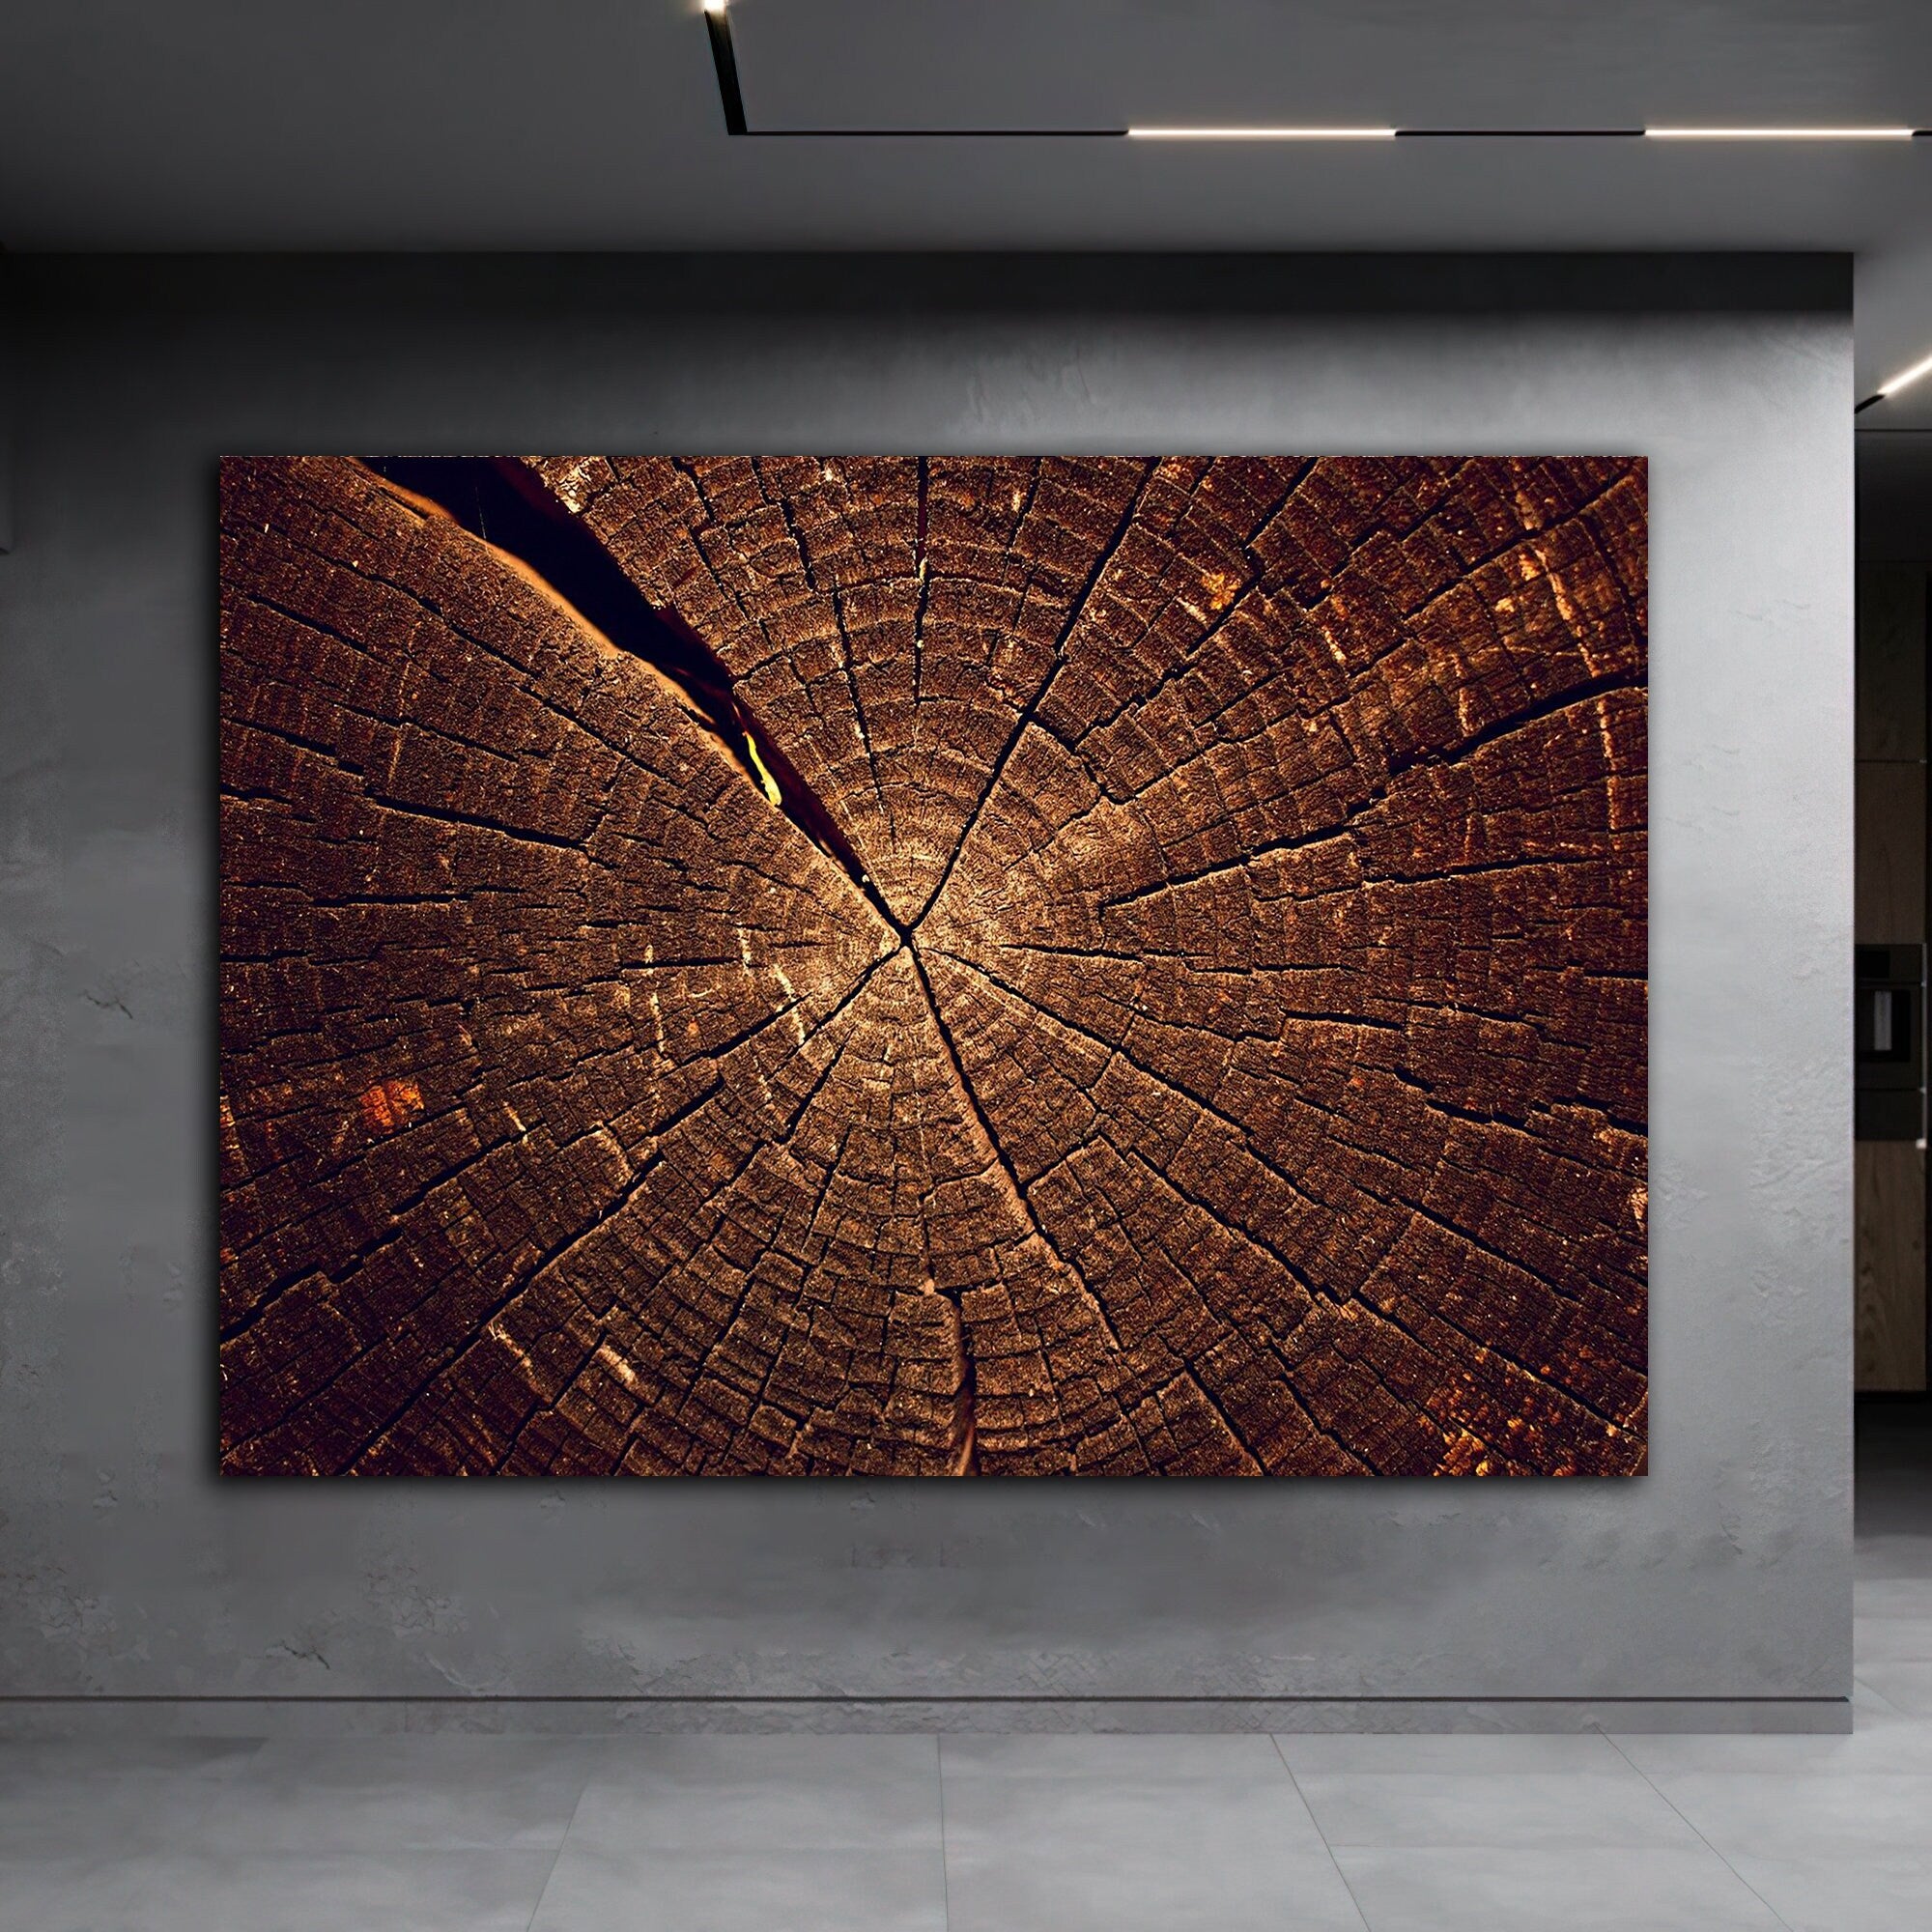 tree crack abstract canvas painting, wood look canvas painting, tree painting, cracks abstract canvas painting, wood pattern image painting Art Exhibition